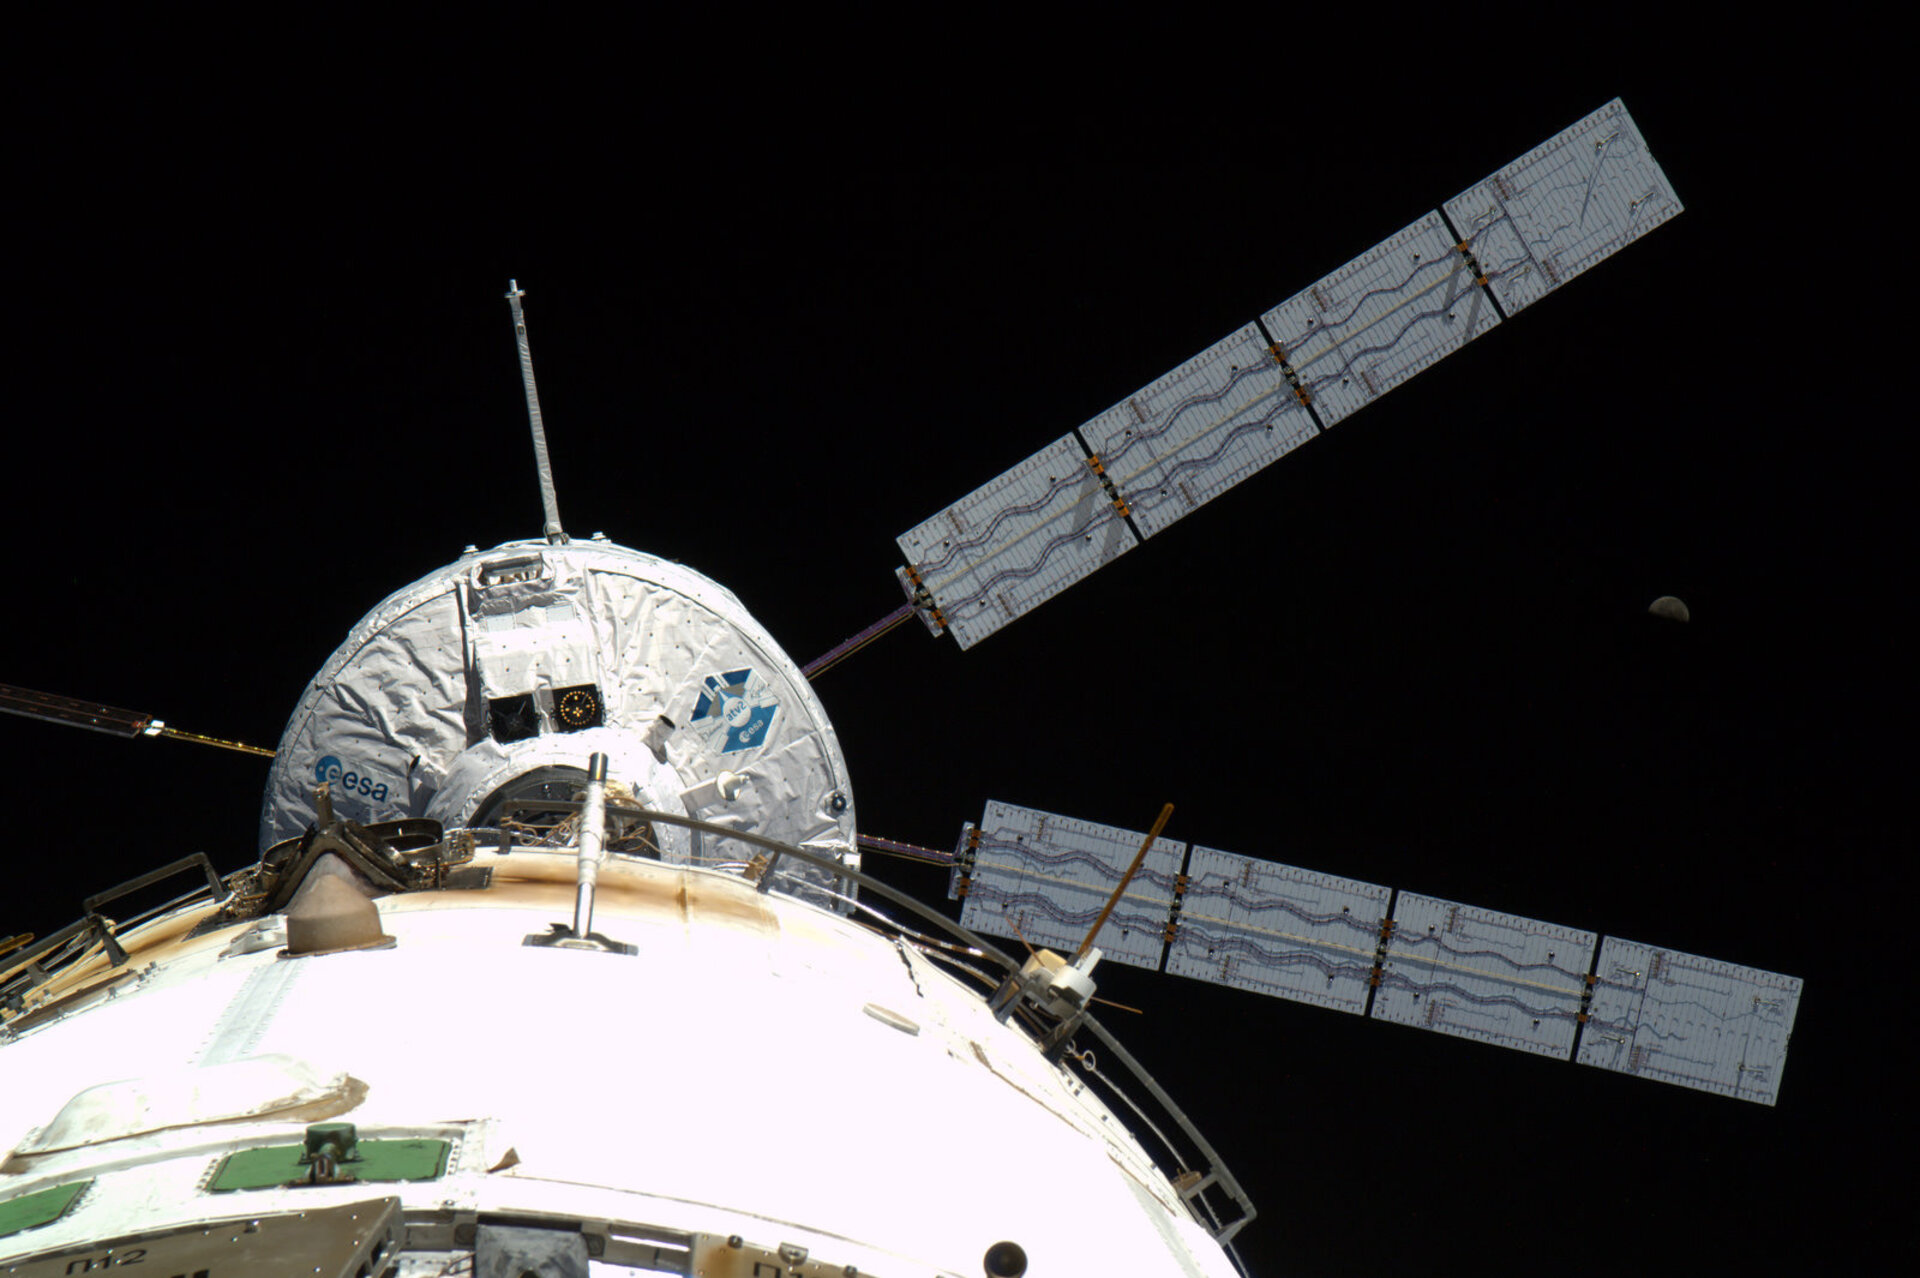 ATV-2 docking with ISS on 24 February 2011